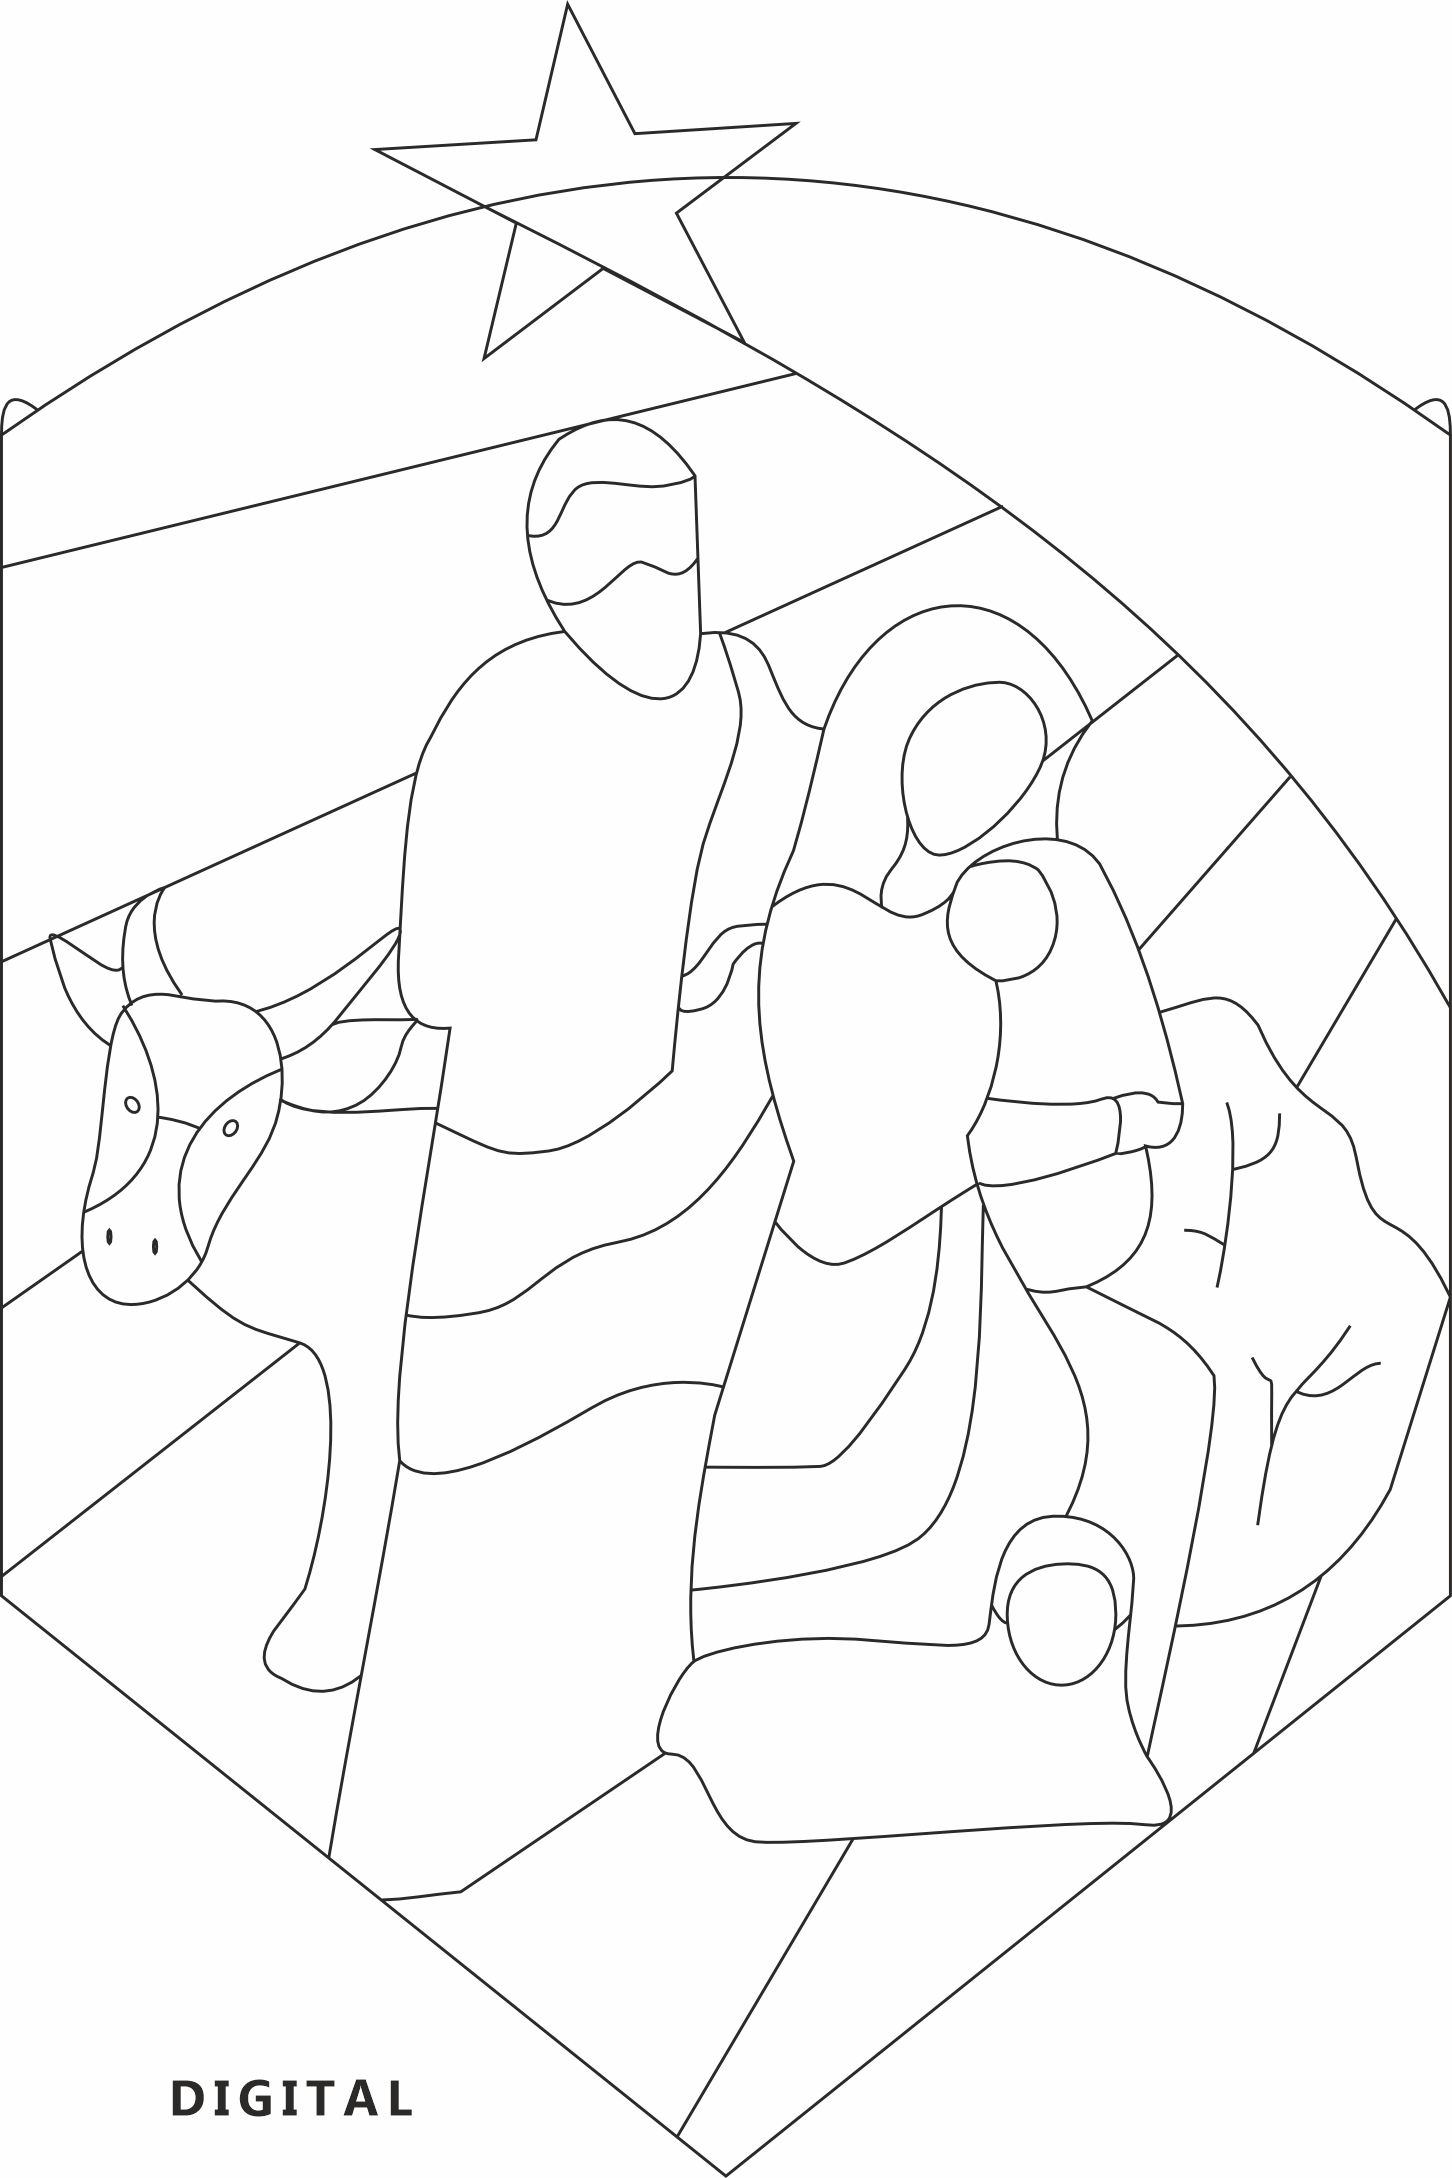 Christmas nativity scene stained glass pattern